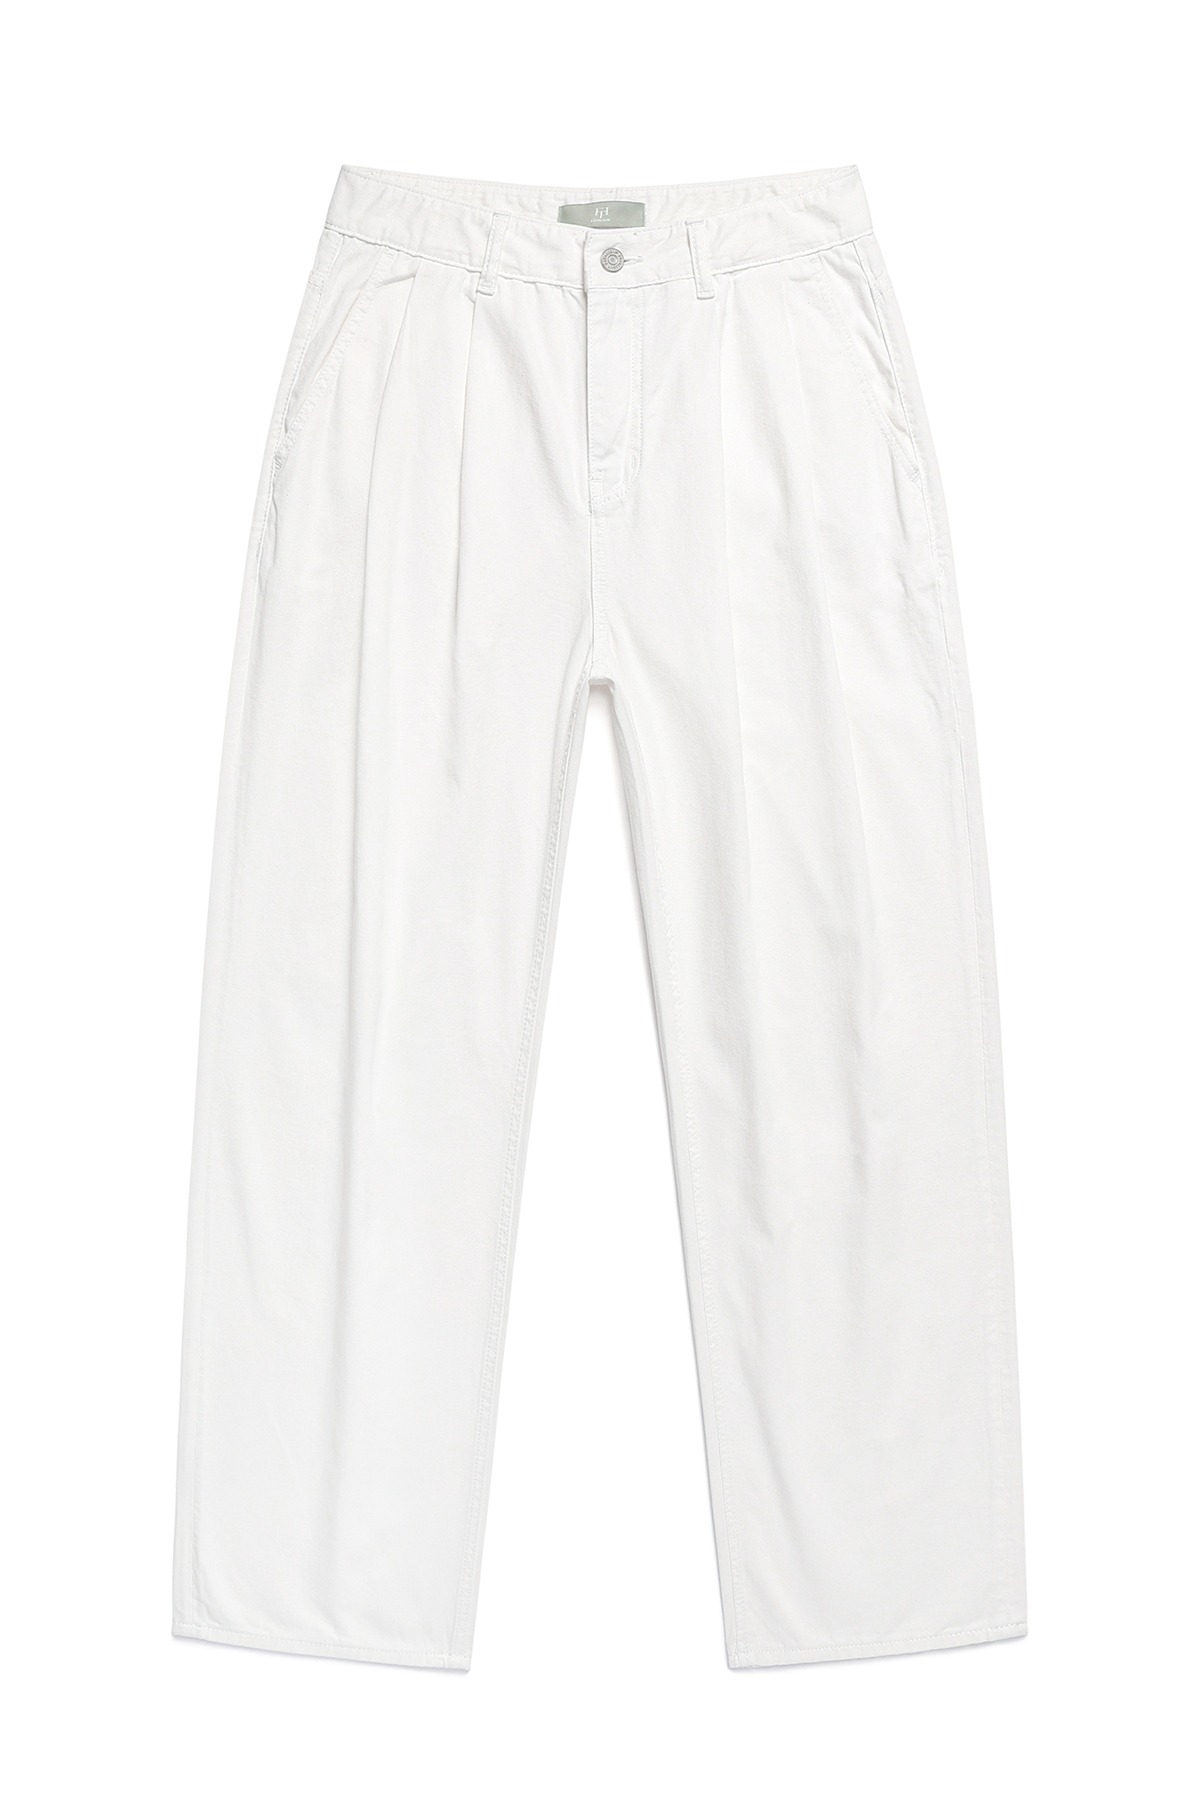 #0281 mer two tuck wide white